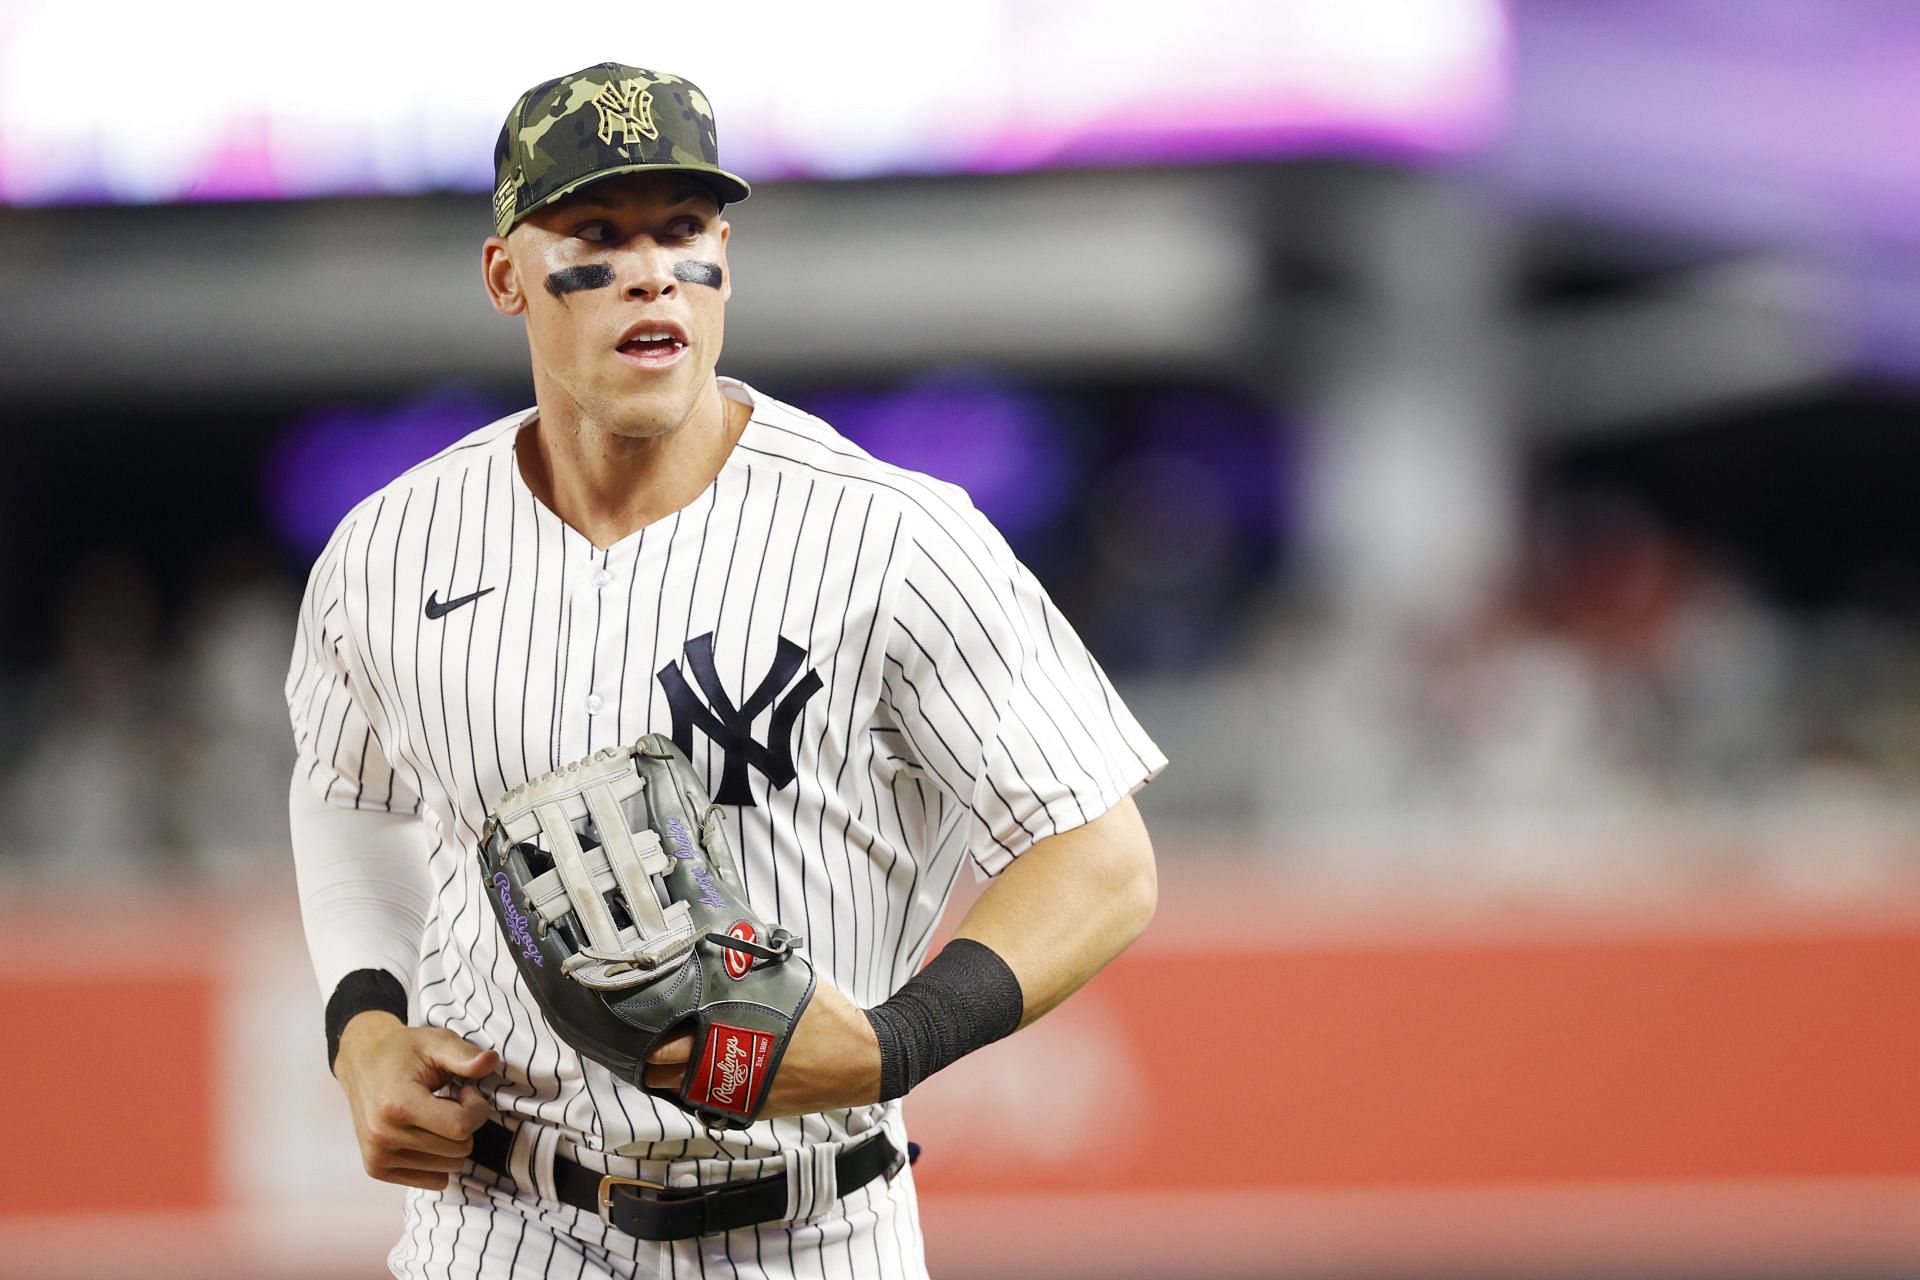 Aaron Judge robs Shohei Ohtani of homer, then hits dinger of his own in  Yankees-Angels showdown of MVPs